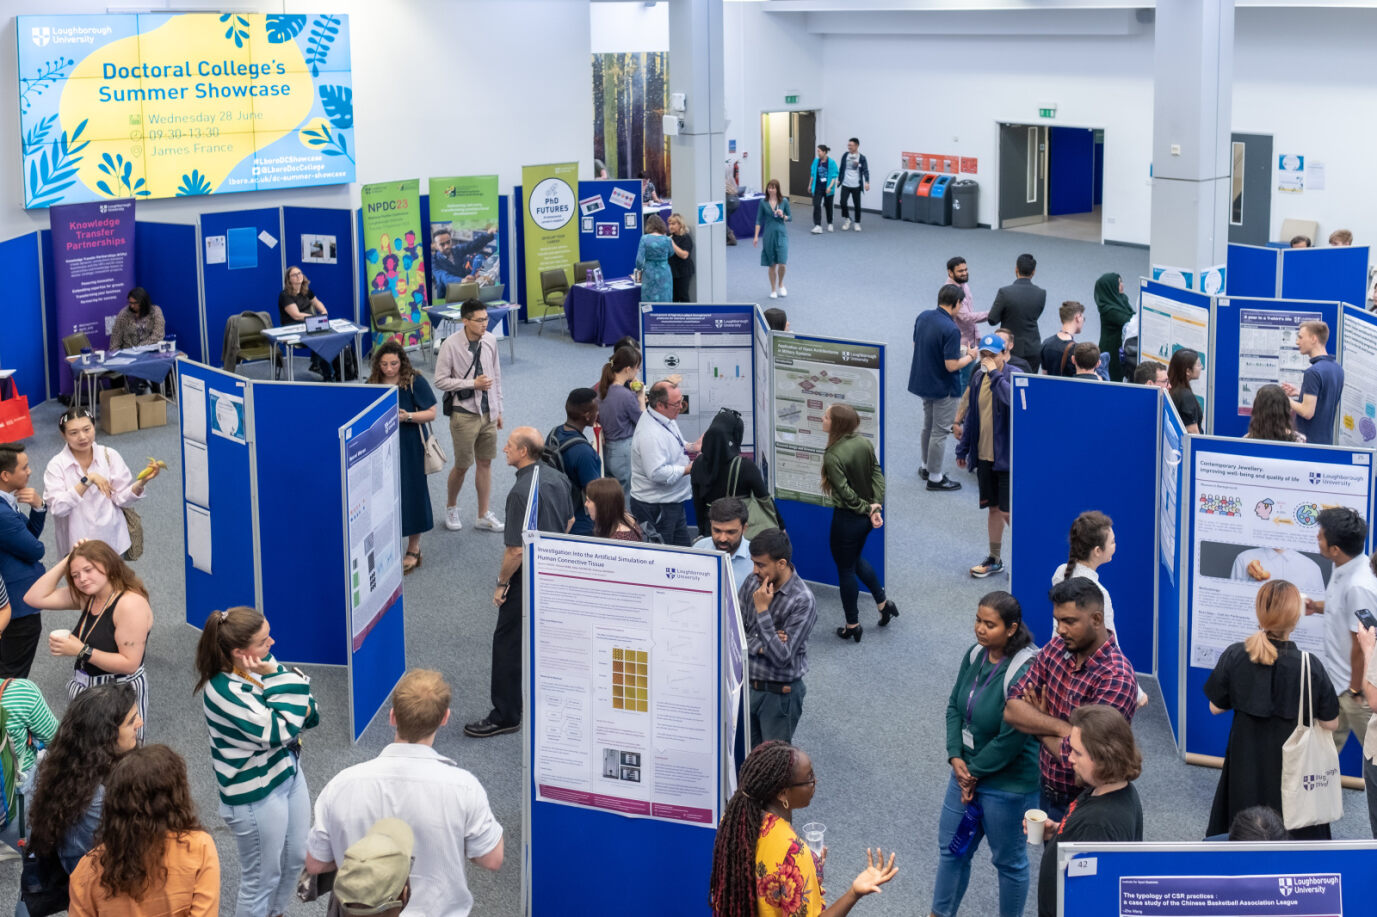 Doctoral researchers exhibiting their posters and networking.